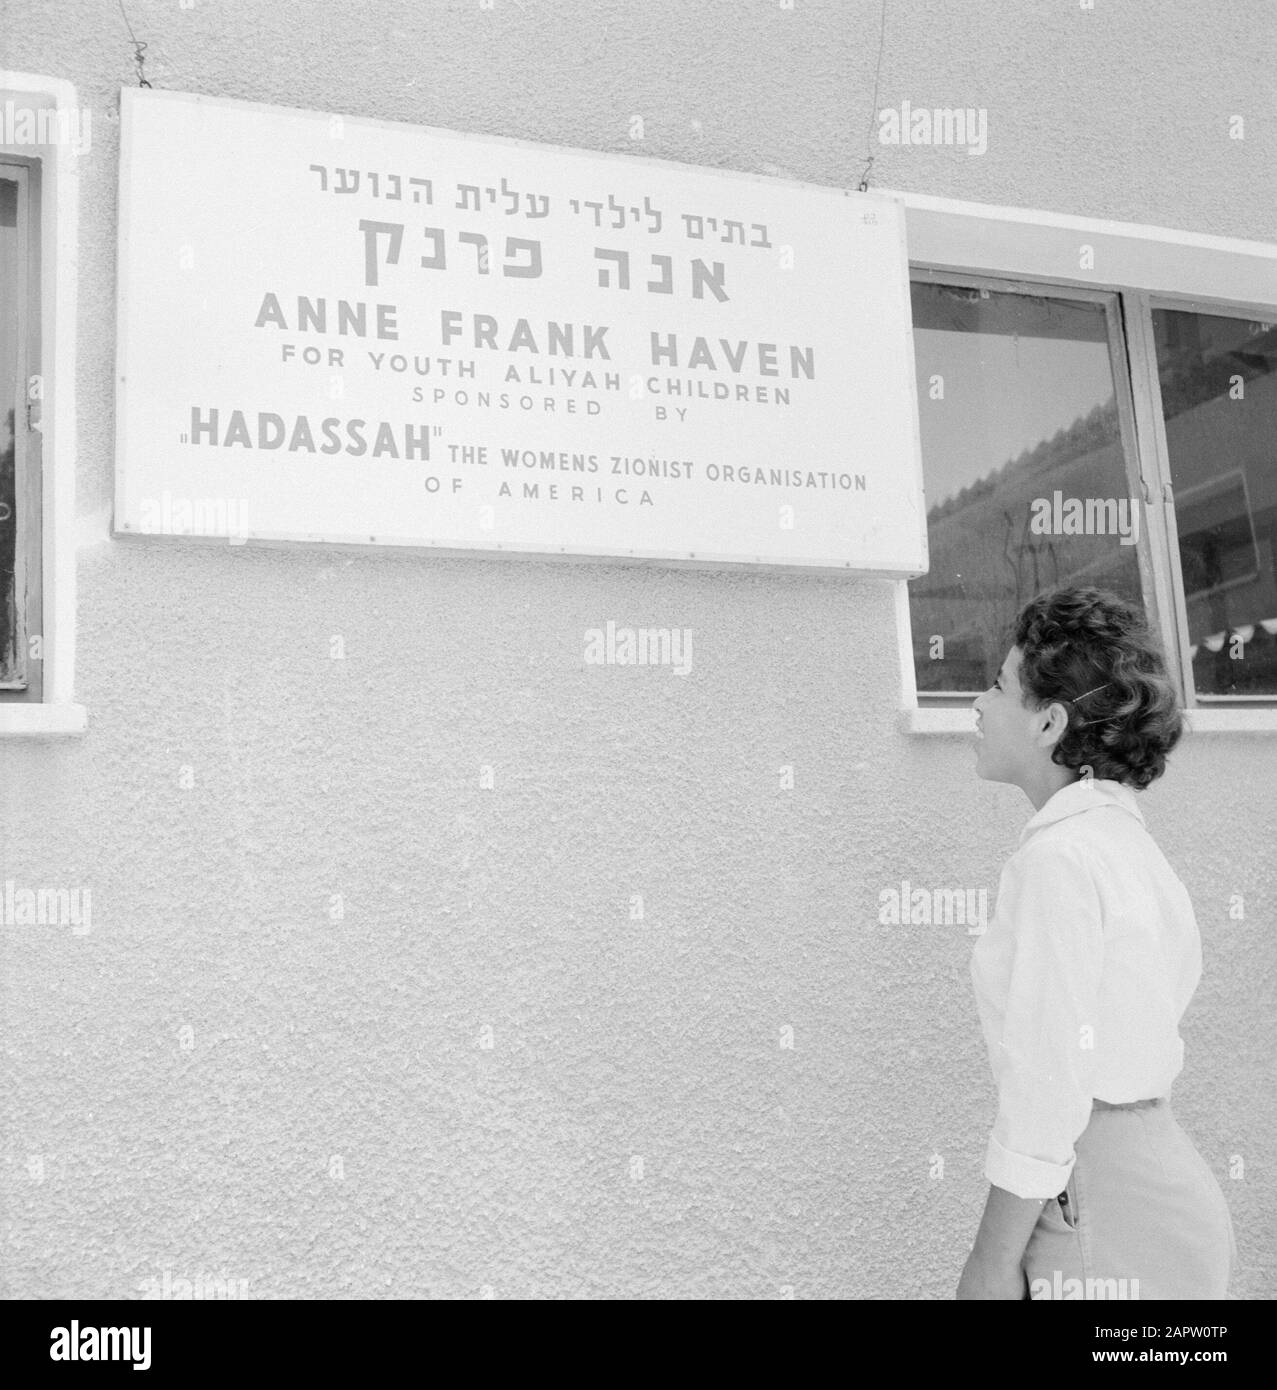 Youth Center Ramat Hadassah. Memorial board of the sponsor of the Anne Frank Haven, the Zionist women's organization Hadassah in the USA Date: 1 January 1964 Location: Israel, USA Keywords: buildings, child protection, education, pedagogy, sponsorship, women's movement, Zionism Personal name: Frank, Anne Stock Photo